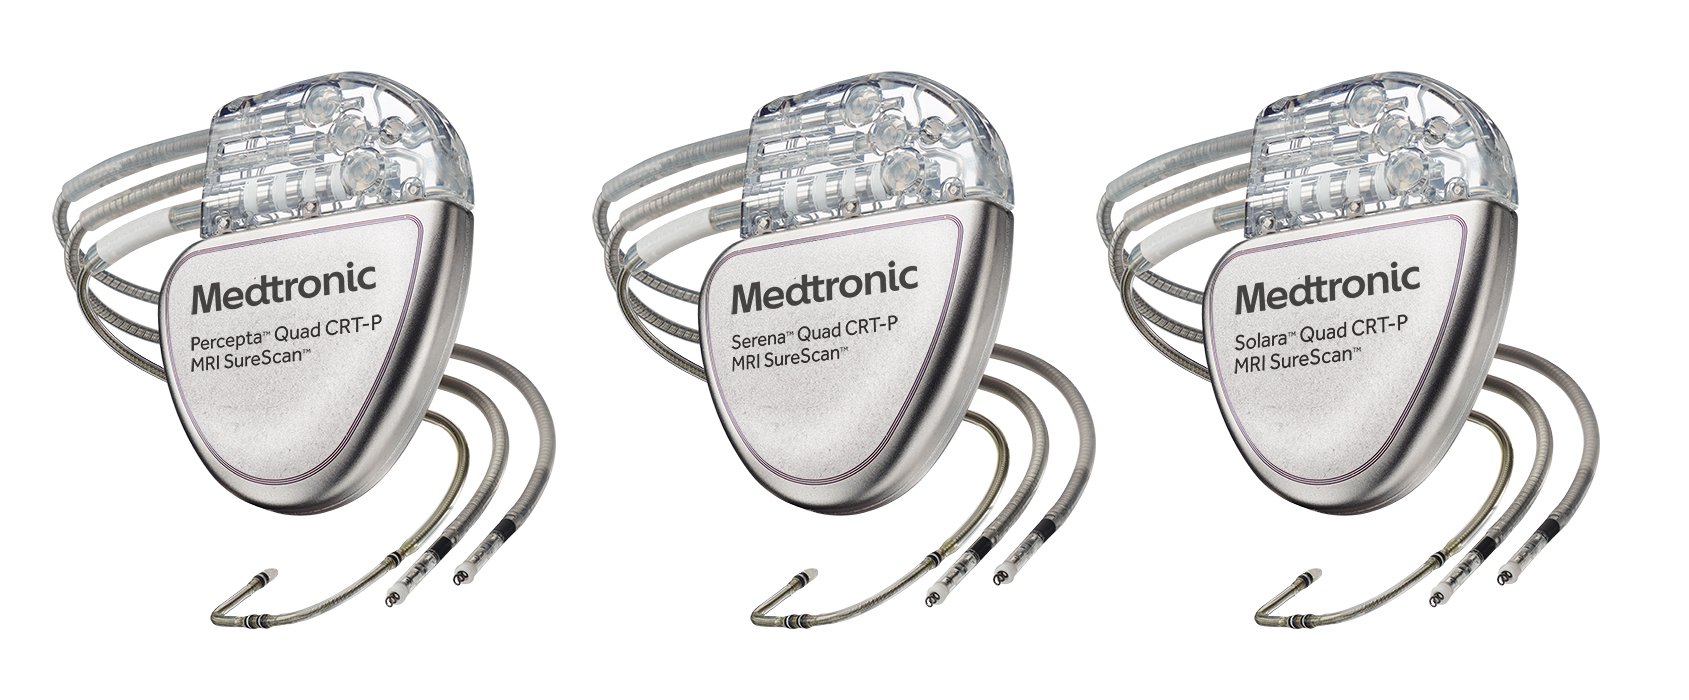 gedragen Alfabet G FDA Warns of Premature Battery Depletion in Some Medtronic Pacemakers | DAIC